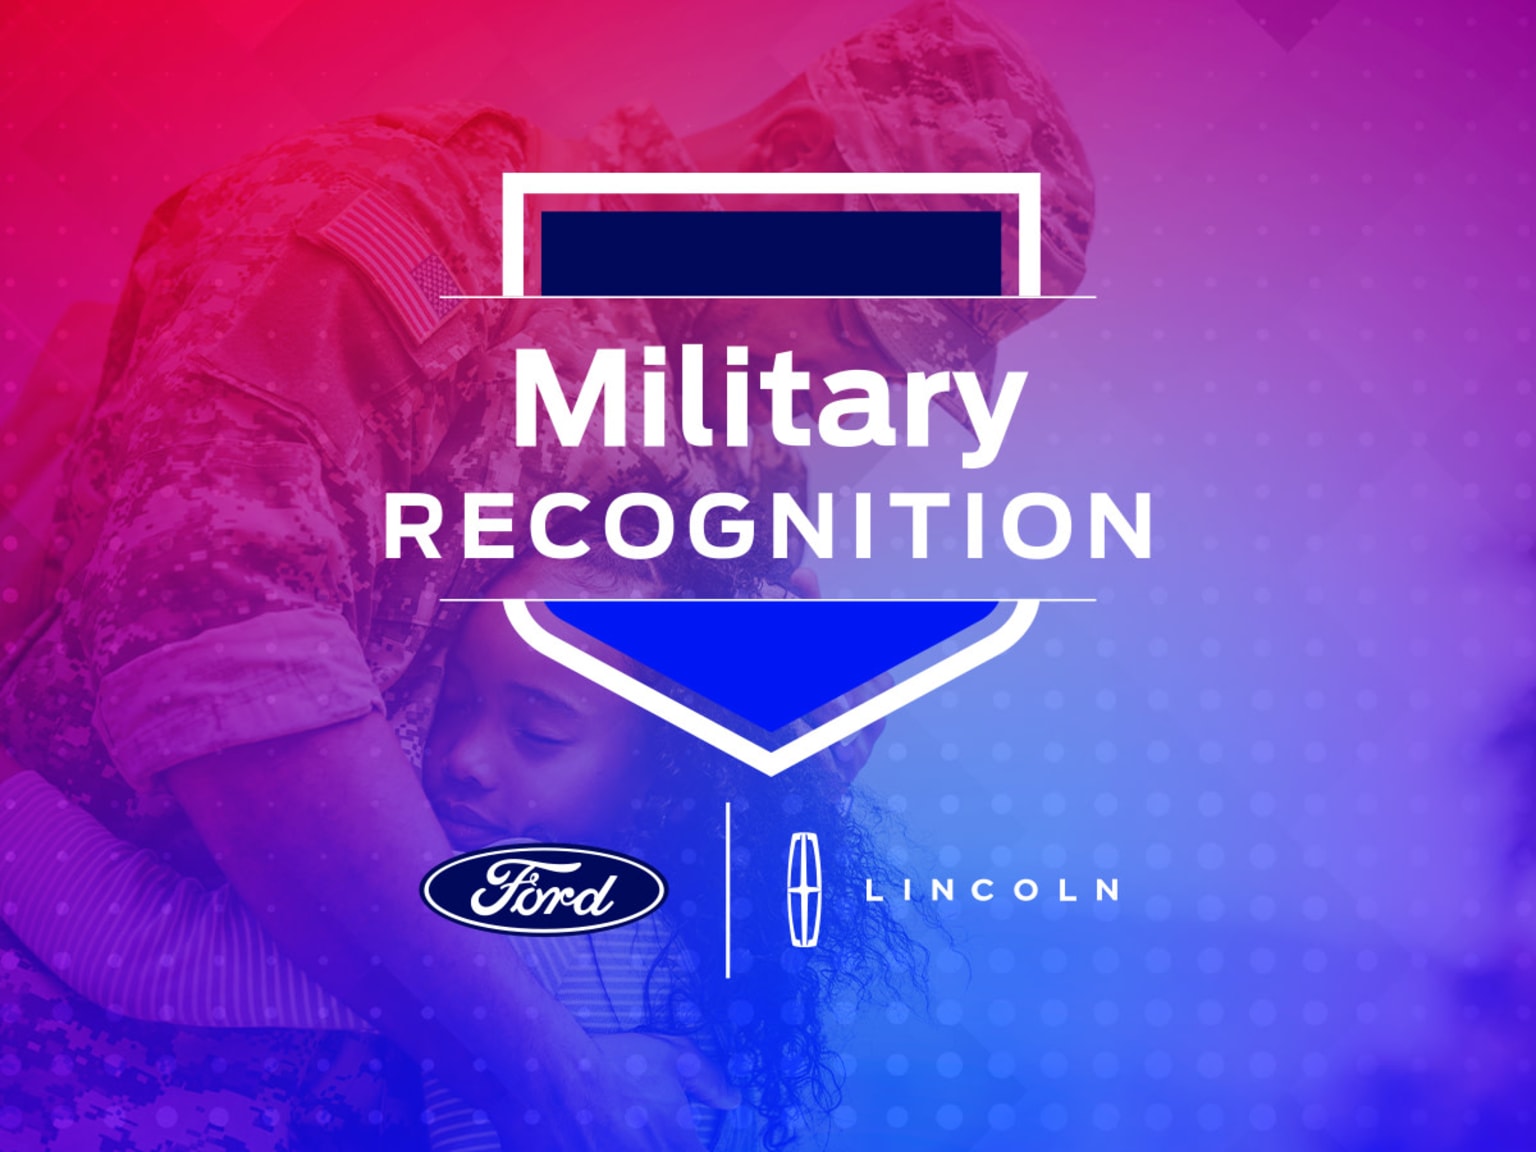 Ford Military Recognition Program